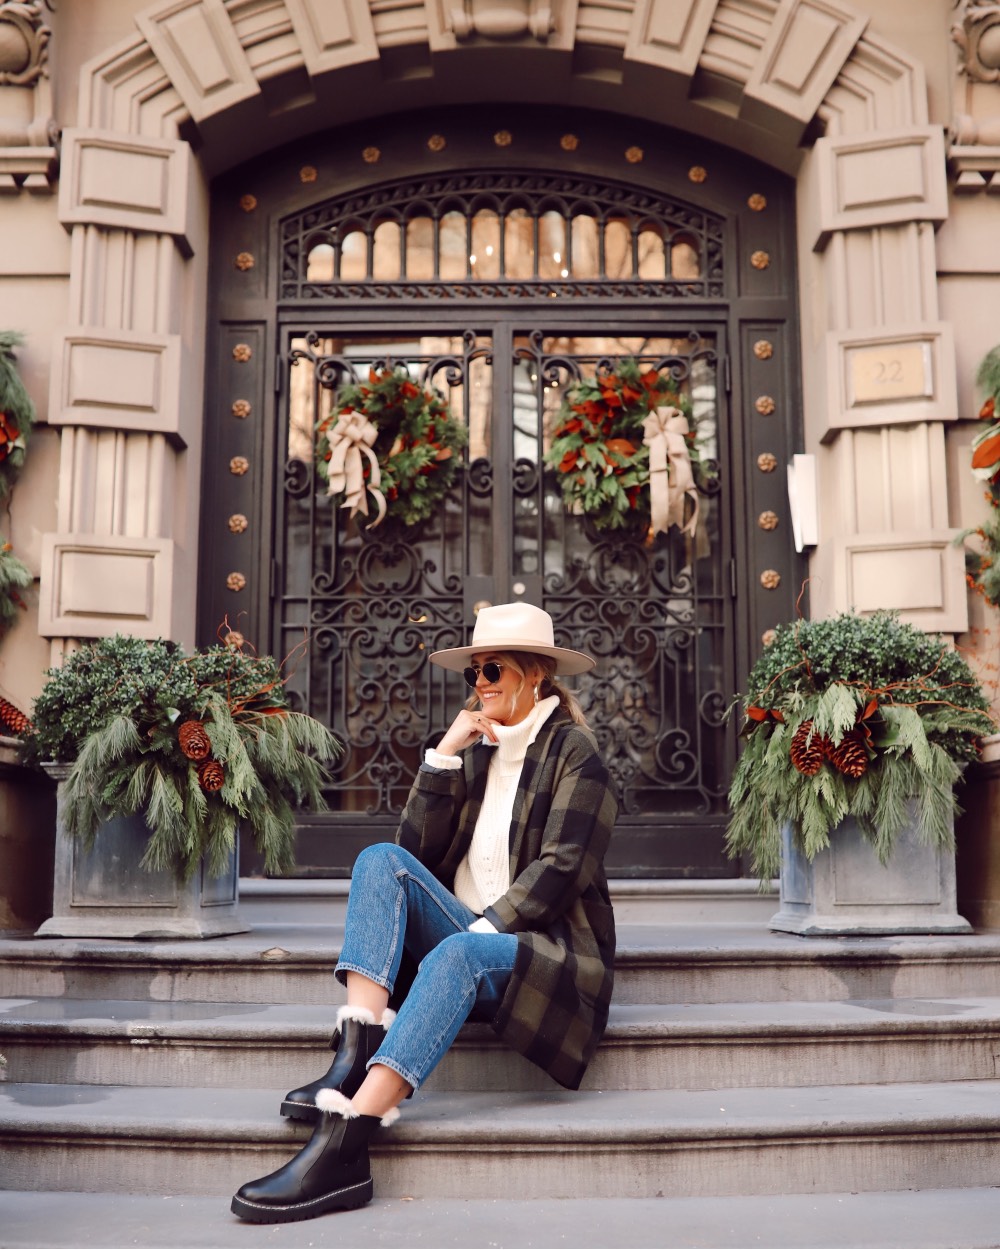 Anna sitting on steps outside a pretty building in New York City.